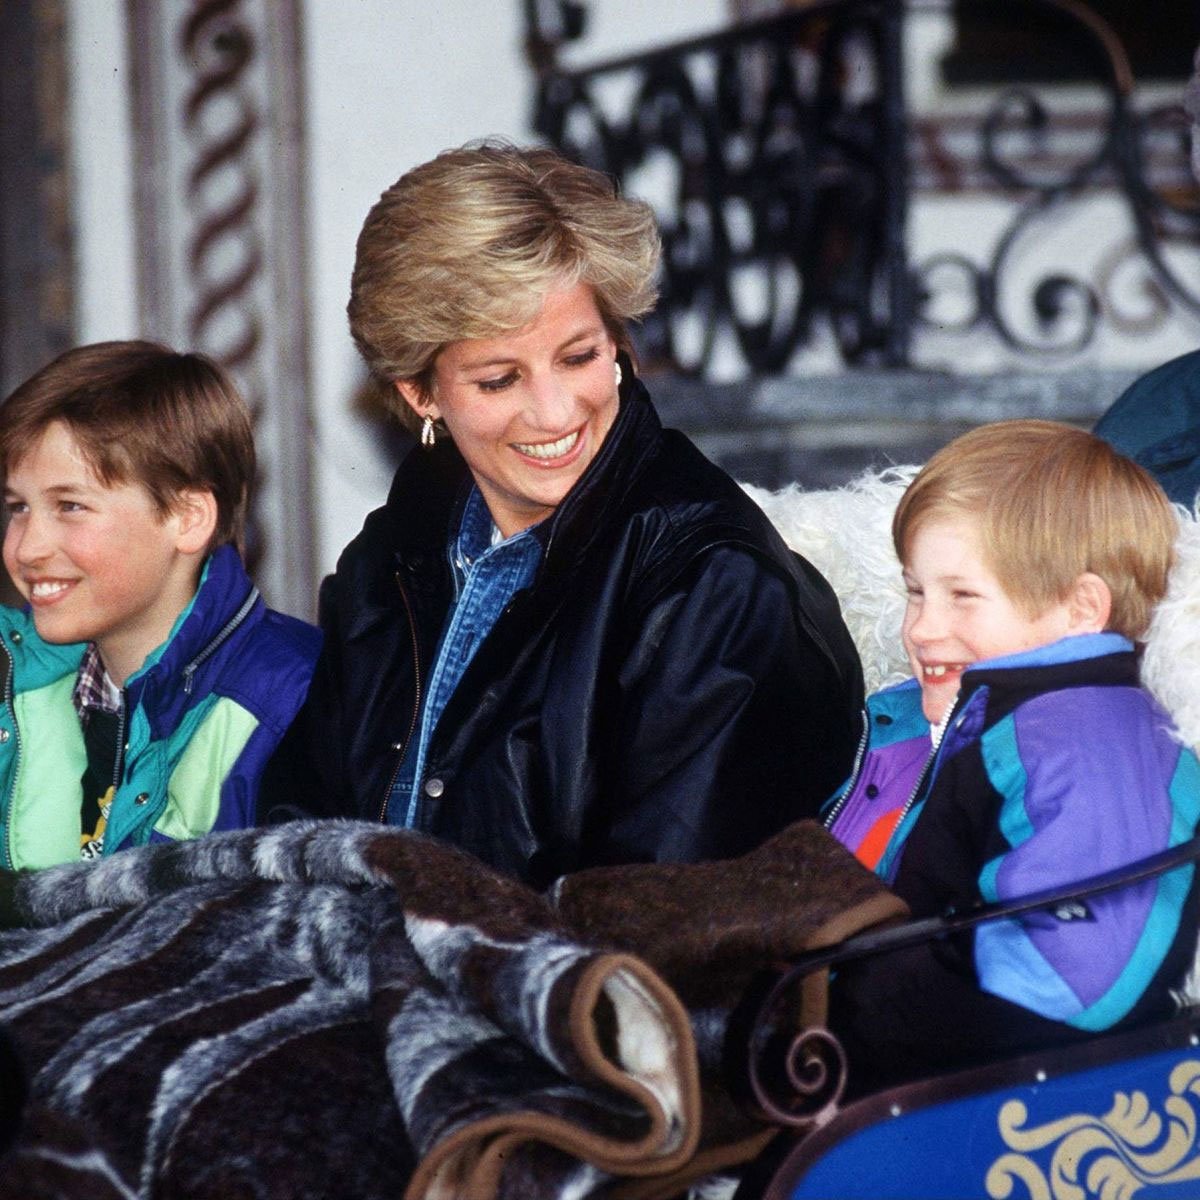 Diana’s death investigator recalls first moments with grieving Prince William, Harry